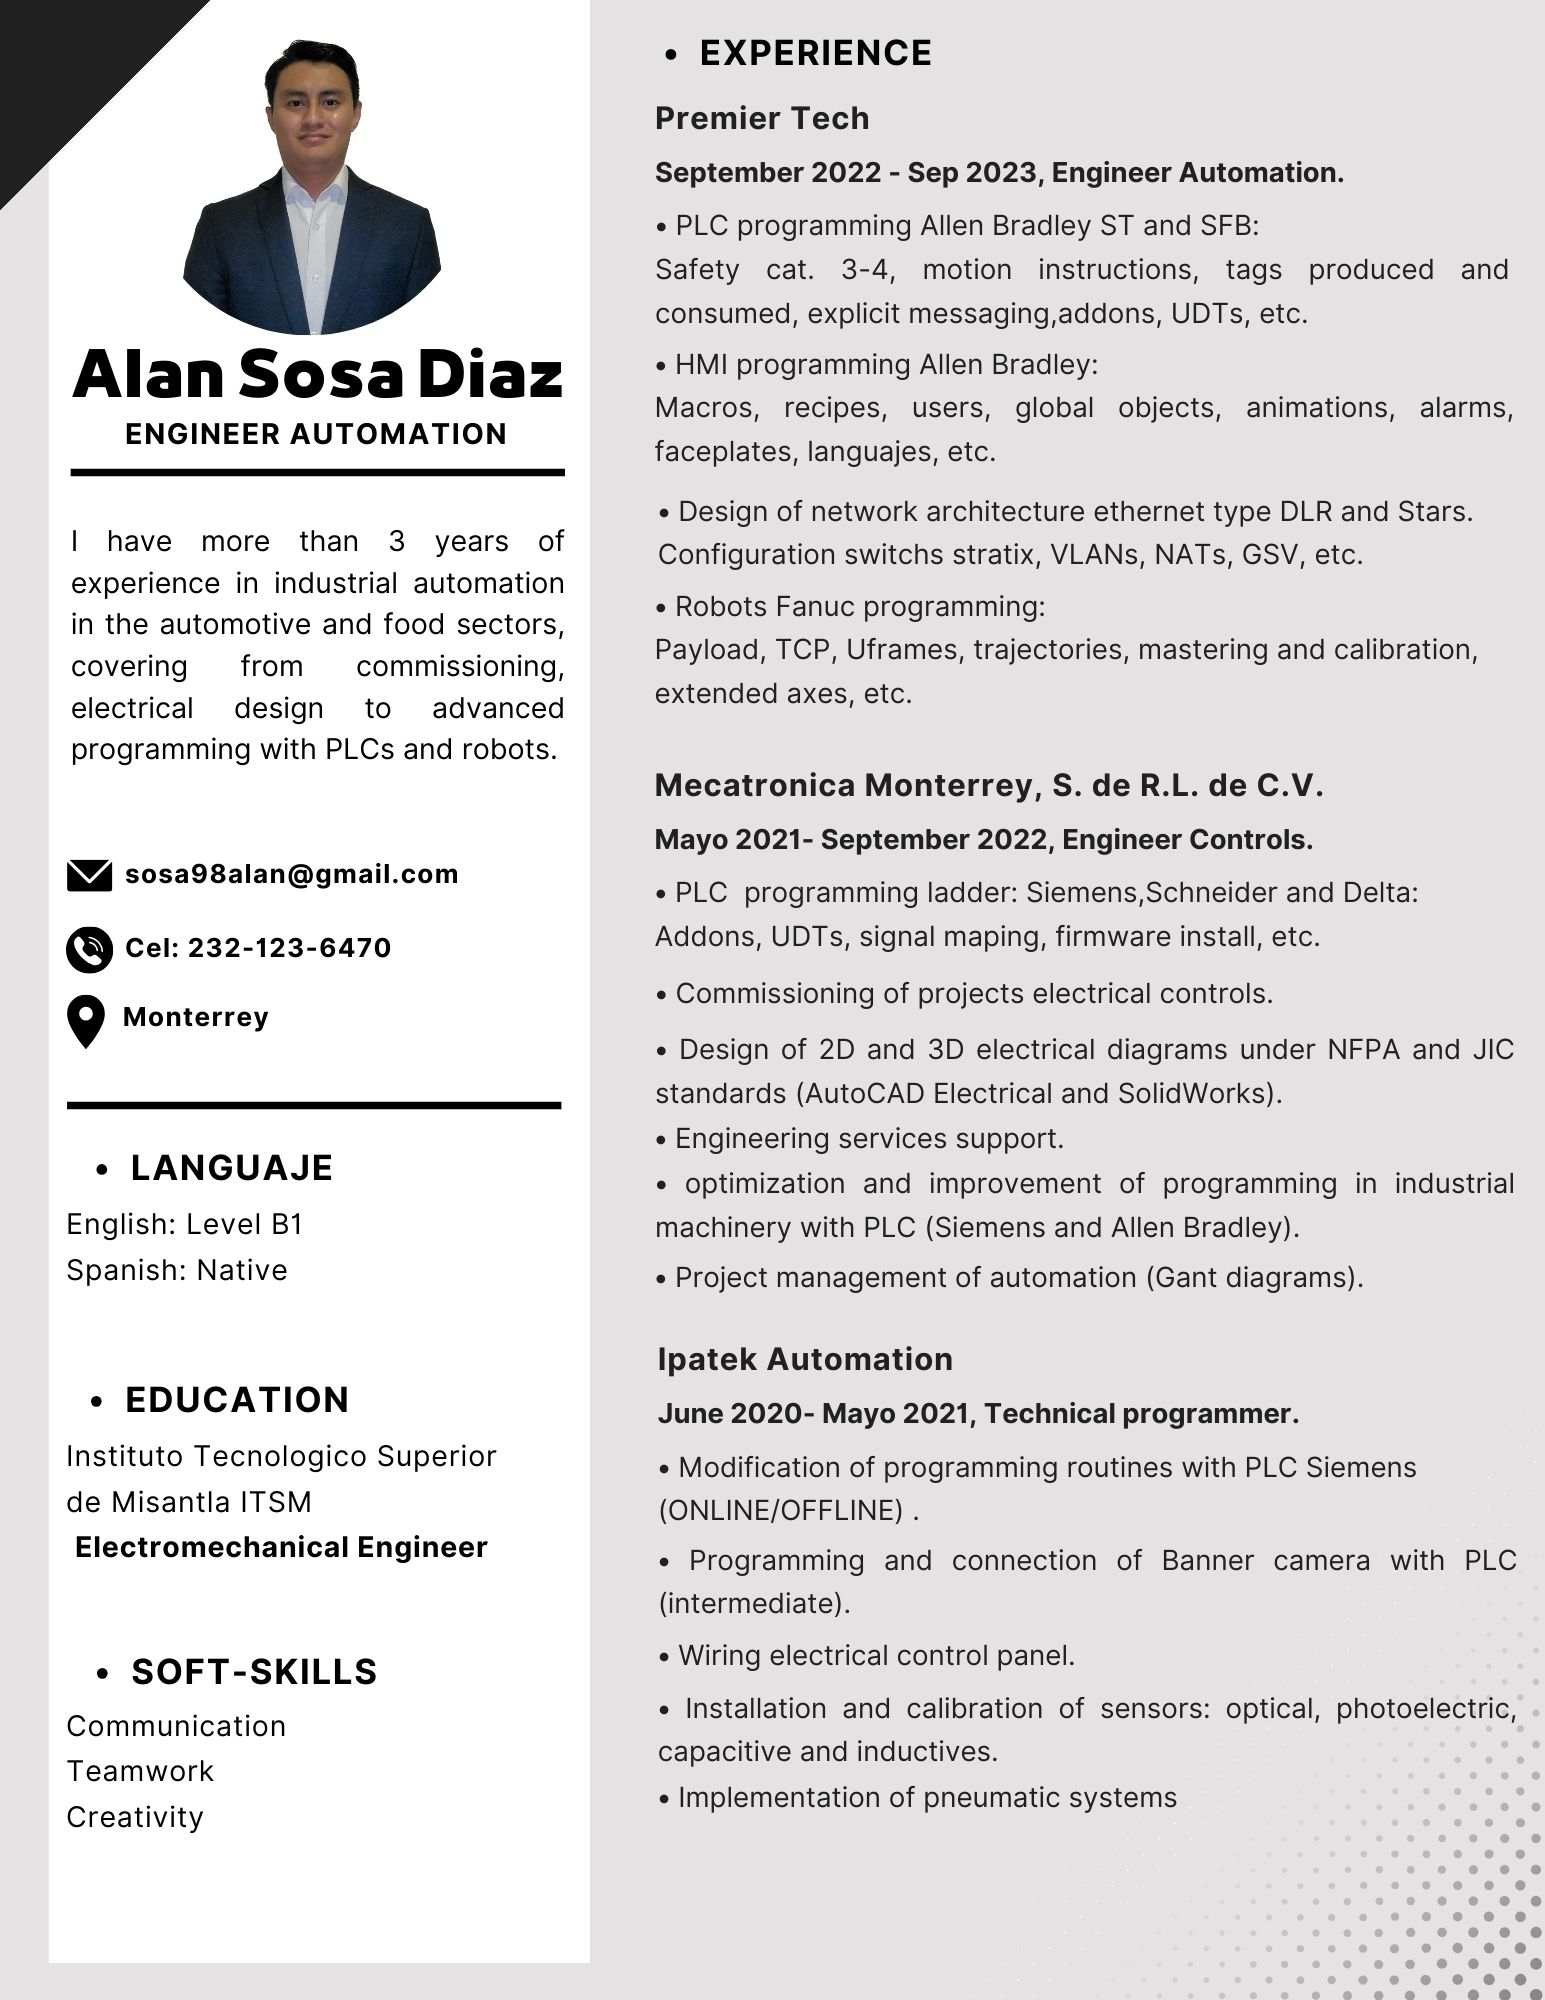 Alan SosaDiaz

ENGINEER AUTOMATION

 

I have more than 3 years of
experience in industrial automation
in the automotive and food sectors,
covering from commissioning,
electrical design to advanced
programming with PLCs and robots.

4 sosa98alan@gmail.com

S Cel: 232-123-6470

Q Monterrey

 

» LANGUAJIJE

English: Level B1
Spanish: Native

« EDUCATION
Instituto Tecnologico Superior
de Misantla ITSM
Electromechanical Engineer

e SOFT-SKILLS
Communication
Teamwork
Creativity

EXPERIENCE

Premier Tech
September 2022 - Sep 2023, Engineer Automation.
* PLC programming Allen Bradley ST and SFB:

Safety cat. 3-4, motion instructions, tags produced and
consumed, explicit messaging,addons, UDTs, etc.

« HMI programming Allen Bradley:
Macros, recipes, users, global objects, animations, alarms,
faceplates, languajes, etc.

« Design of network architecture ethernet type DLR and Stars.
Configuration switchs stratix, VLANs, NATs, GSV, etc.

« Robots Fanuc programming:
Payload, TCP, Uframes, trajectories, mastering and calibration,
extended axes, etc.

Mecatronica Monterrey, S. de R.L. de C.V.

Mayo 2021- September 2022, Engineer Controls.

« PLC programming ladder: Siemens,Schneider and Delta:
Addons, UDTs, signal maping, firmware install, etc.

+ Commissioning of projects electrical controls.

« Design of 2D and 3D electrical diagrams under NFPA and JIC
standards (AutoCAD Electrical and SolidWorks).

« Engineering services support.

« optimization and improvement of programming in industrial
machinery with PLC (Siemens and Allen Bradley).

« Project management of automation (Gant diagrams).

Ipatek Automation
June 2020- Mayo 2021, Technical programmer.

» Modification of programming routines with PLC Siemens
(ONLINE/OFFLINE) .

* Programming and connection of Banner camera with PLC
(intermediate).

« Wiring electrical control panel.

« Installation and calibration of sensors: optical, photoelectric,
capacitive and inductives.

« Implementation of pneumatic systems